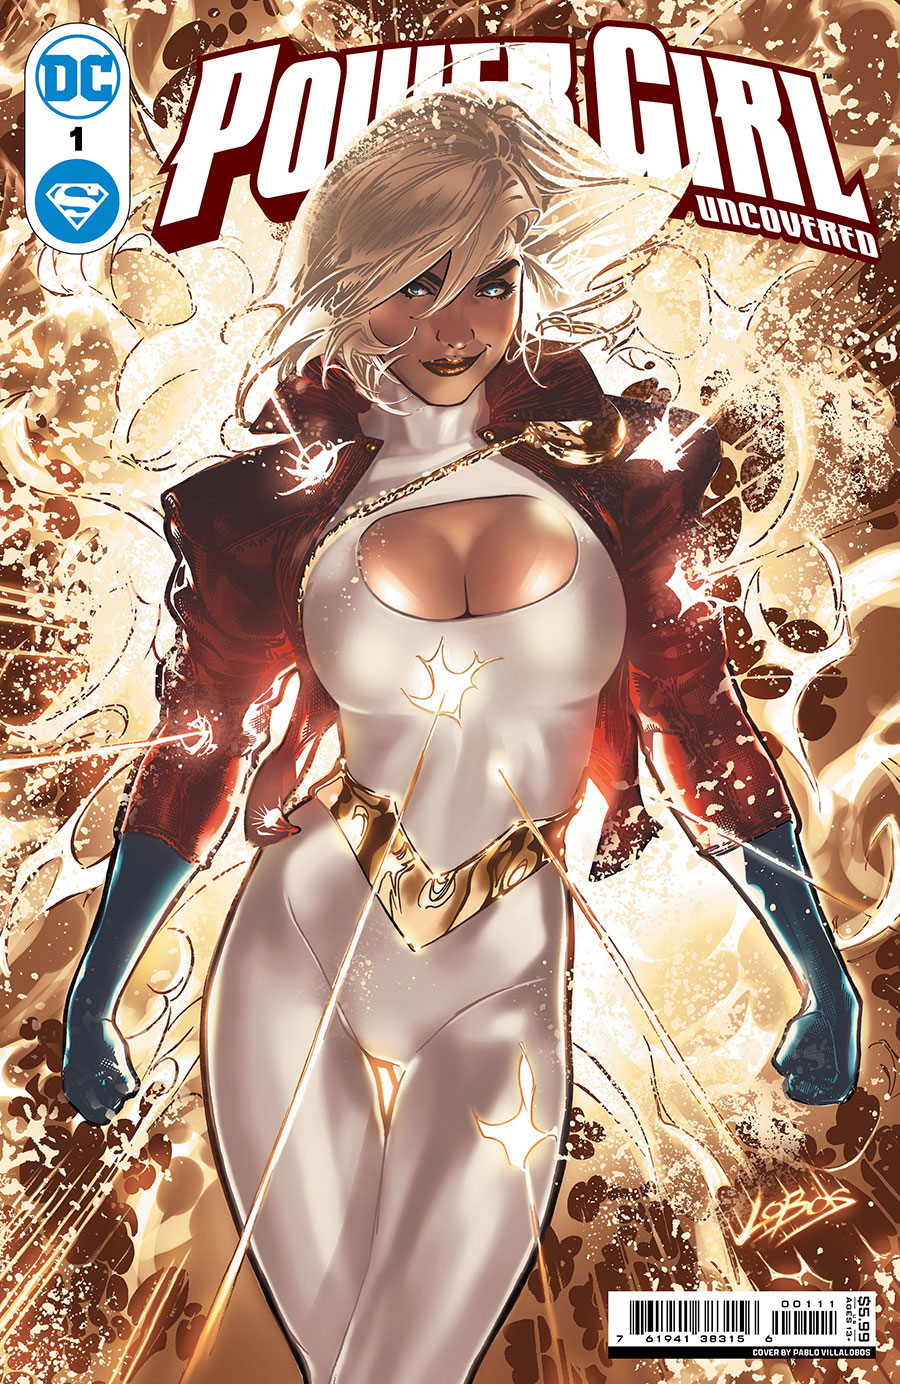 Power Girl Uncovered #1 (One Shot) Cover A Regular Pablo Villalobos Cover